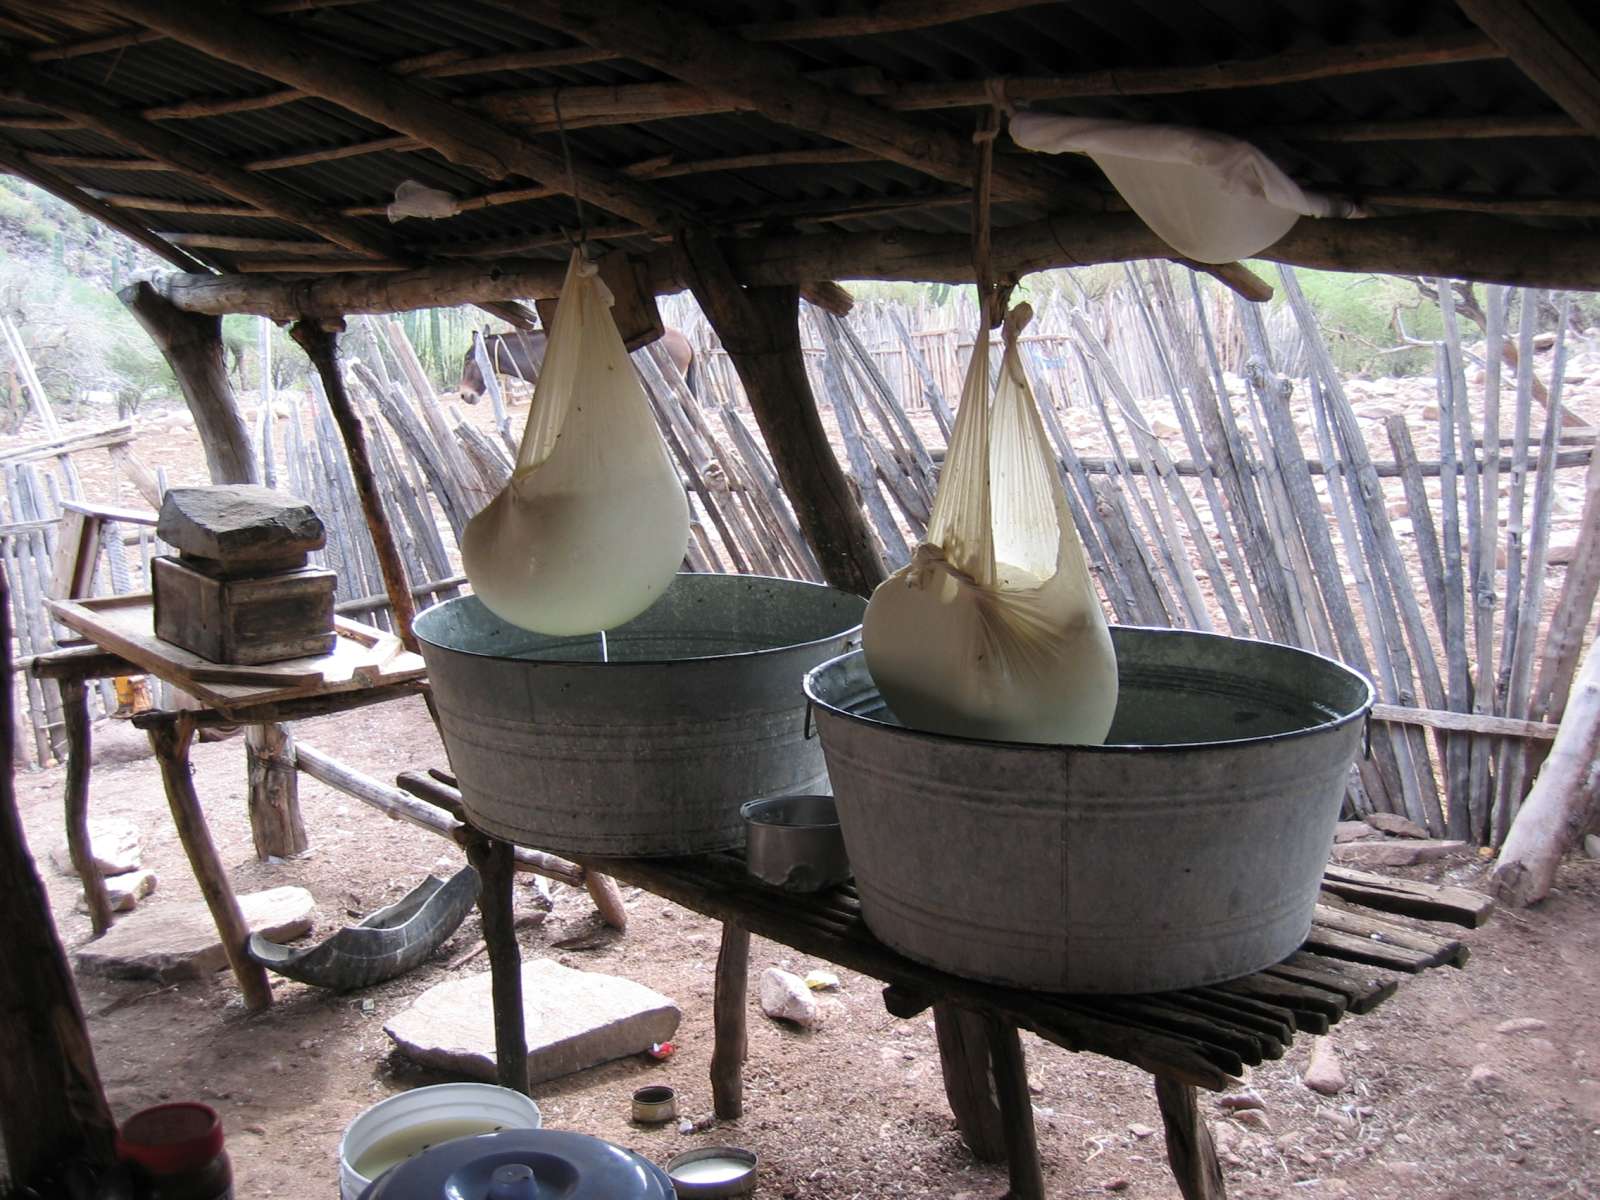 We camped at a goat ranch before our trip to Clavelitos. Here is goat cheese in the making.